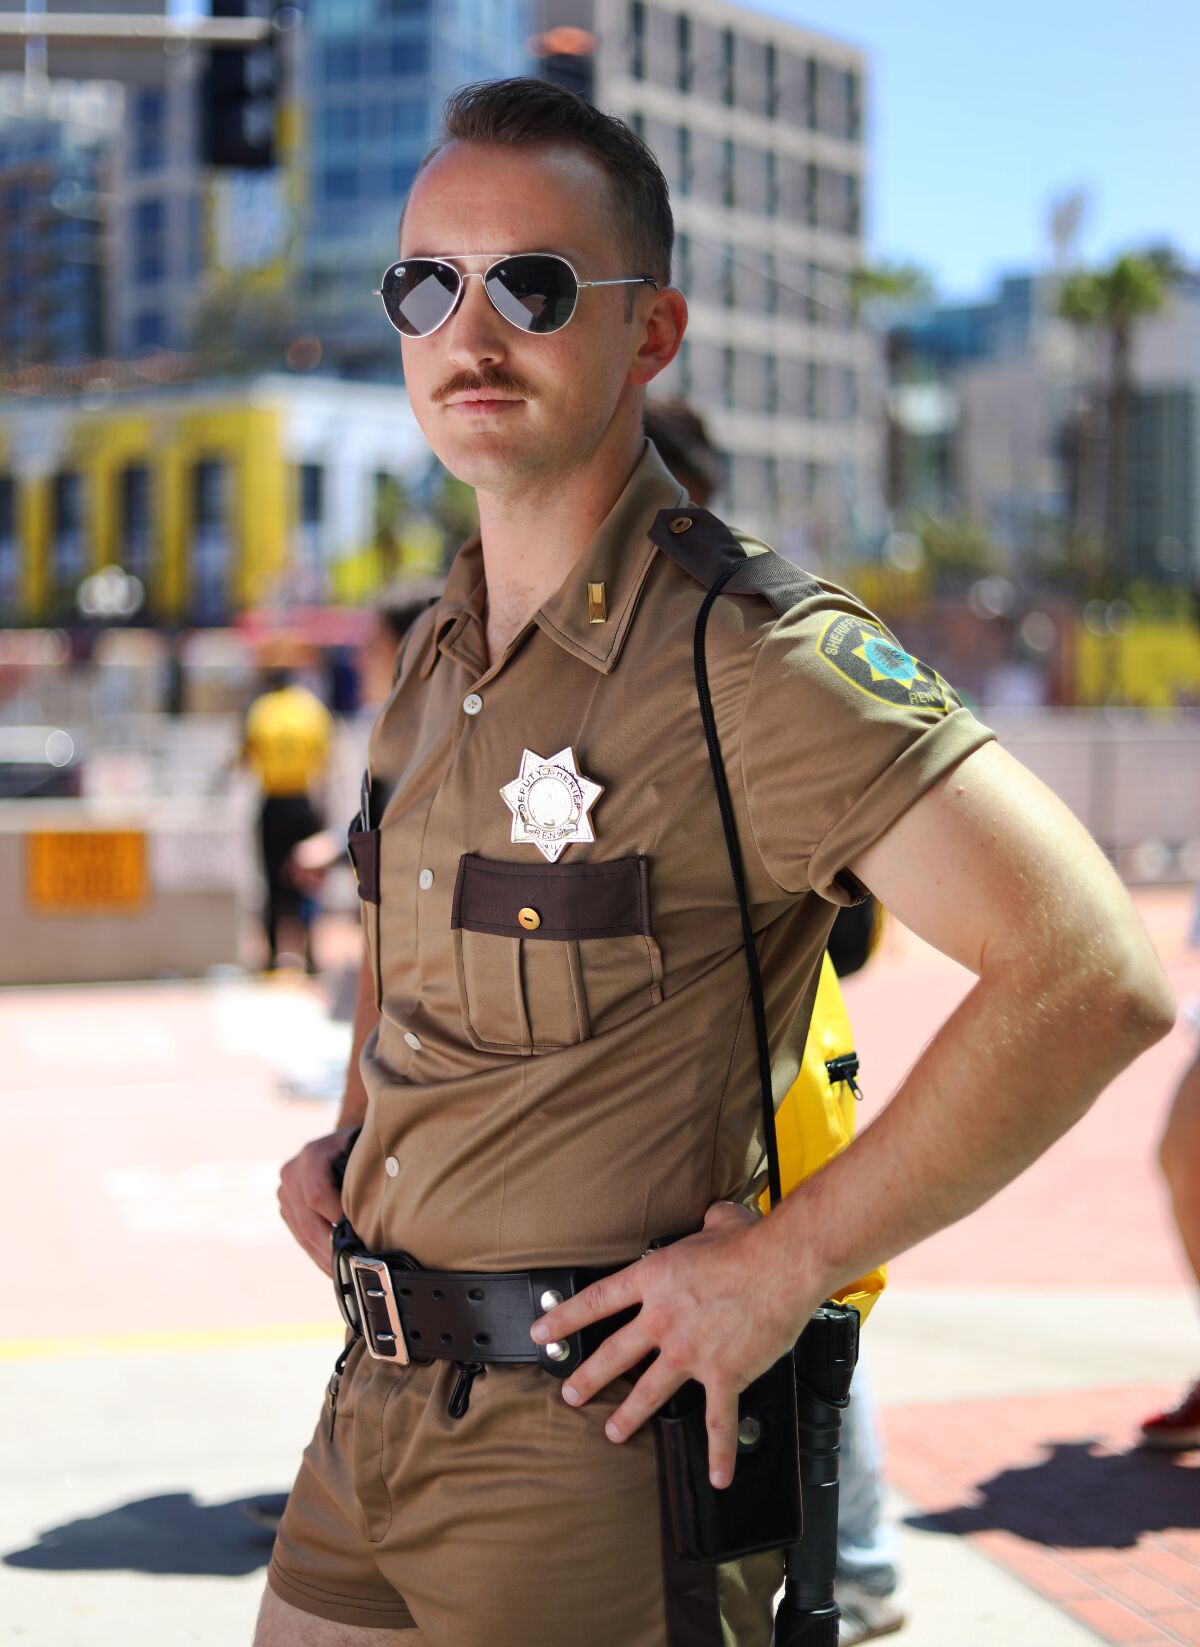 Calvin Sykes of San Diego dressed as "Reno 911!'s" Lt. Dangle at Comic-Con International in San Diego on July 20, 2019.